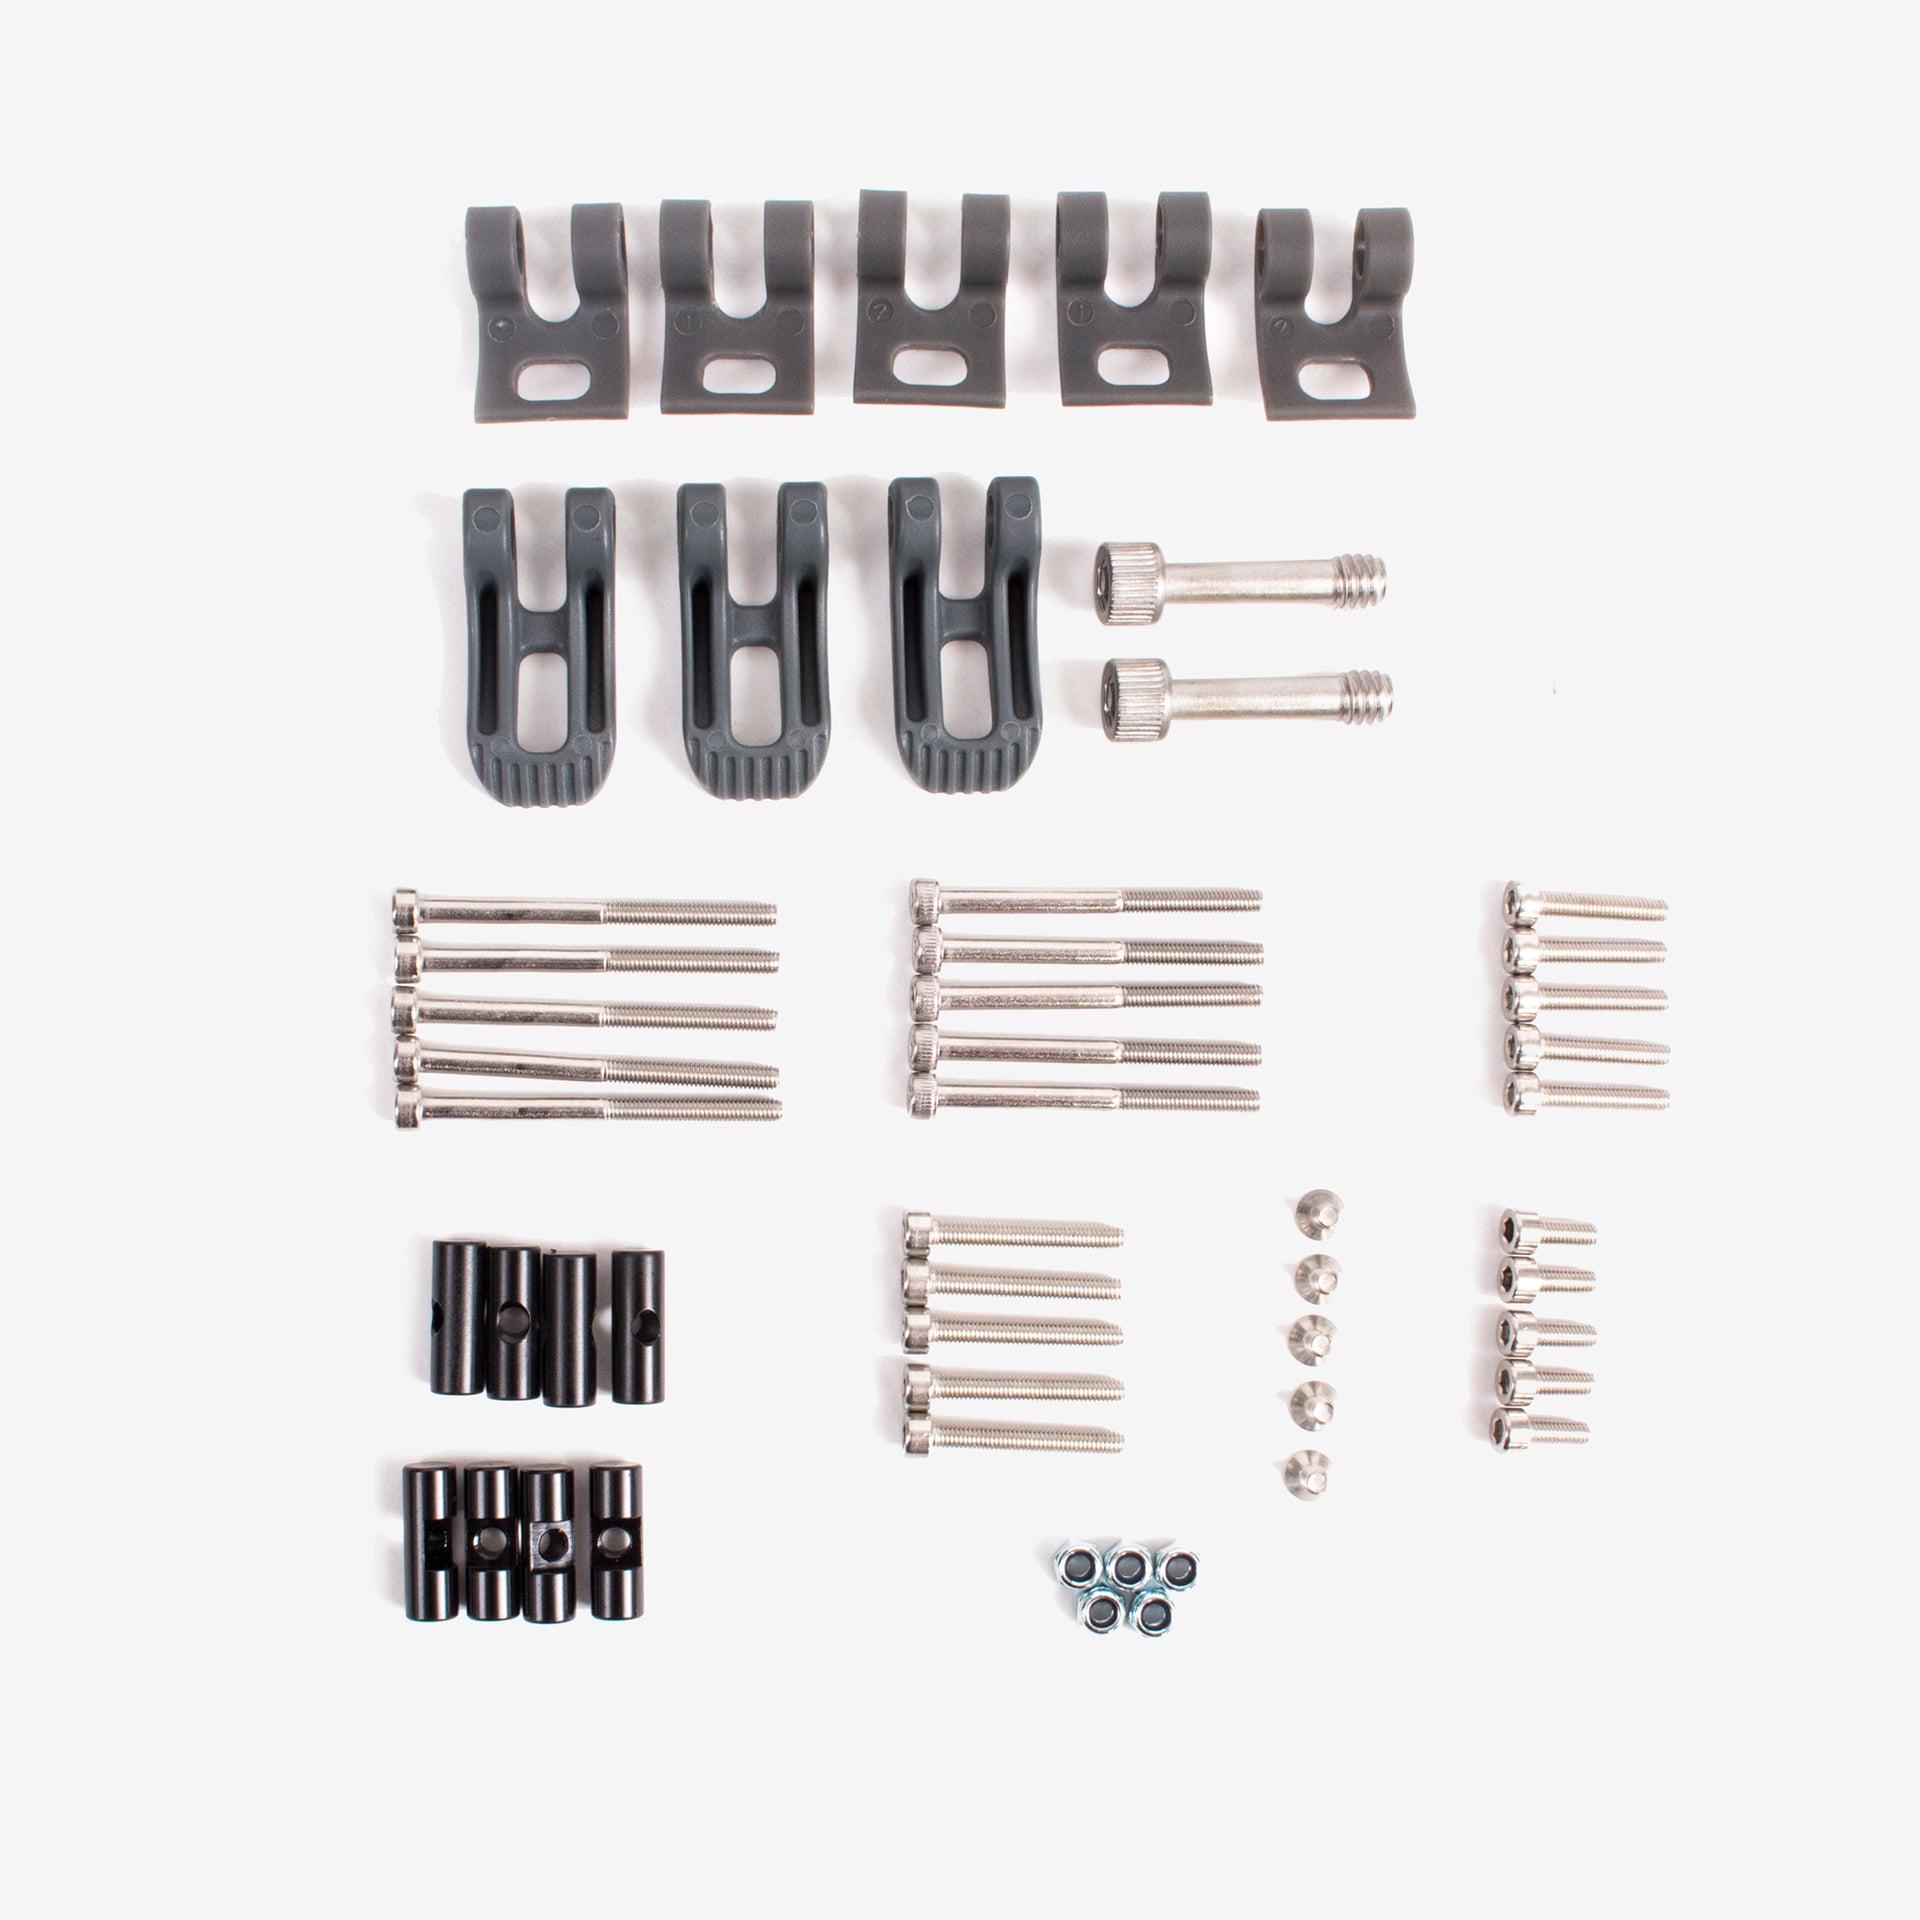 A26261300 spare Parts Kit for. Spares kit